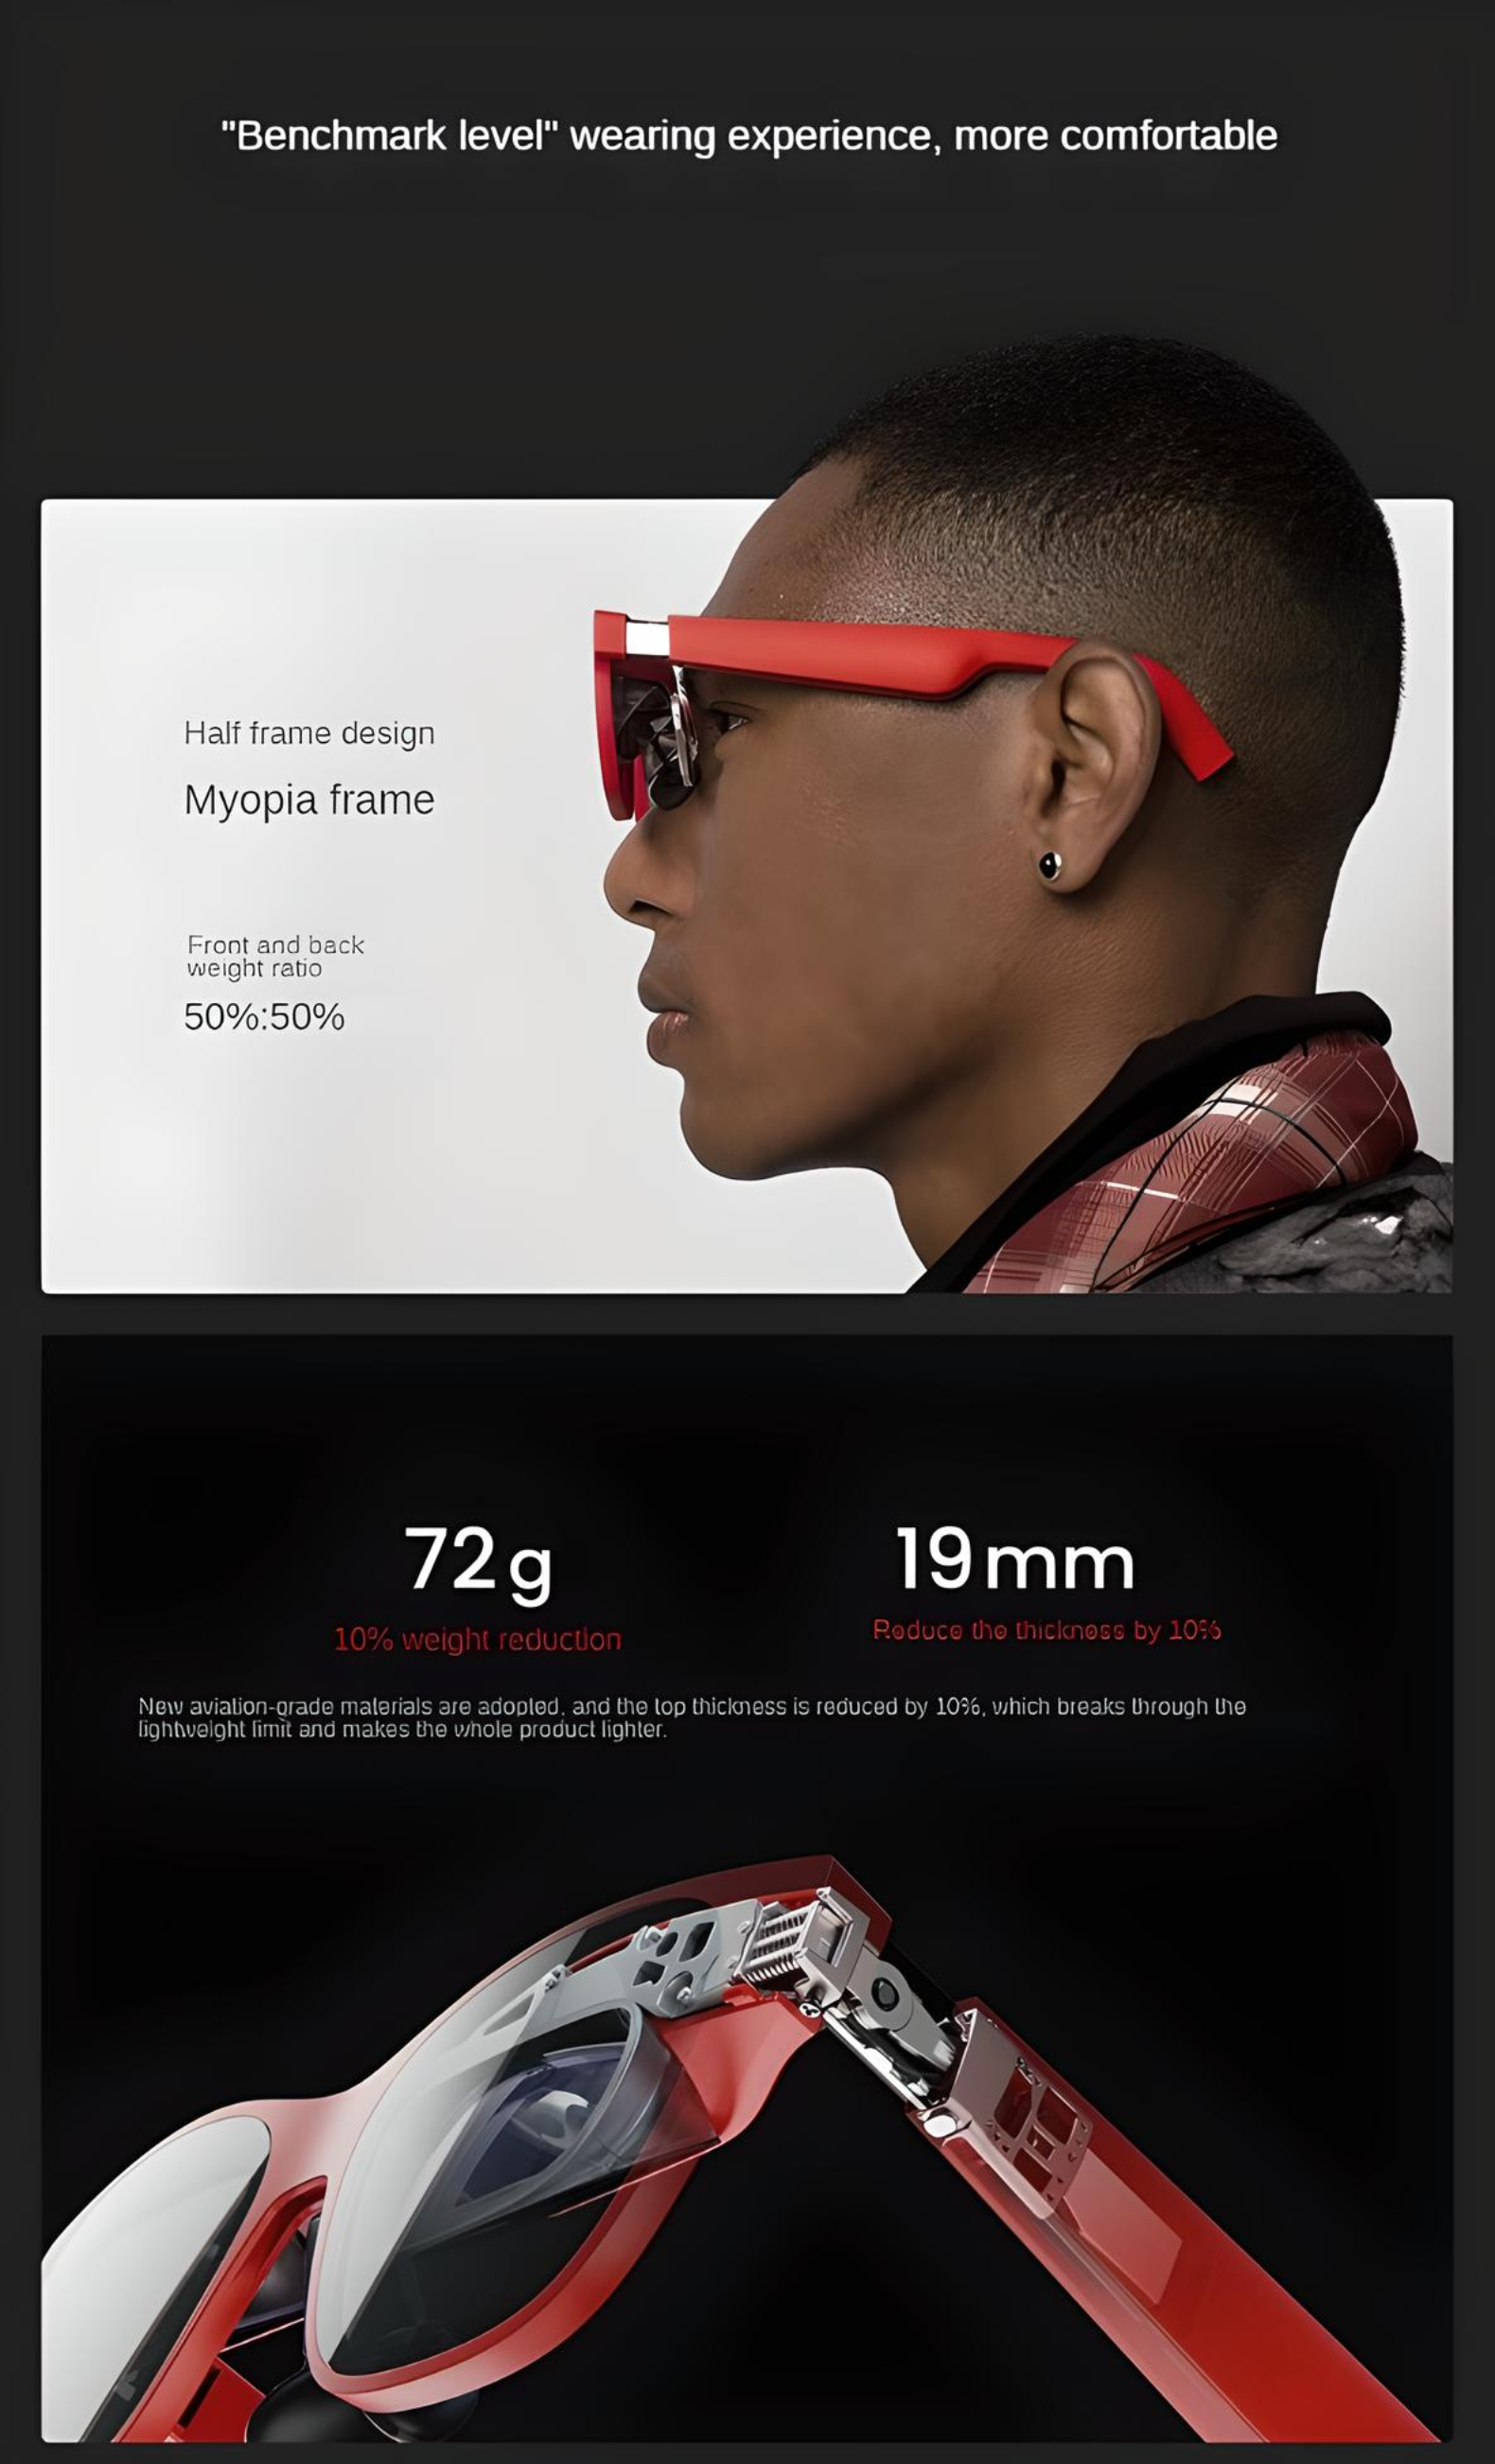 XReal Air 2 Pro: A Leap Forward in Consumer Grade AR Glasses Technology -  Men's Journal Tech Trends: Stay Ahead with Tech News, Rumors & Deals